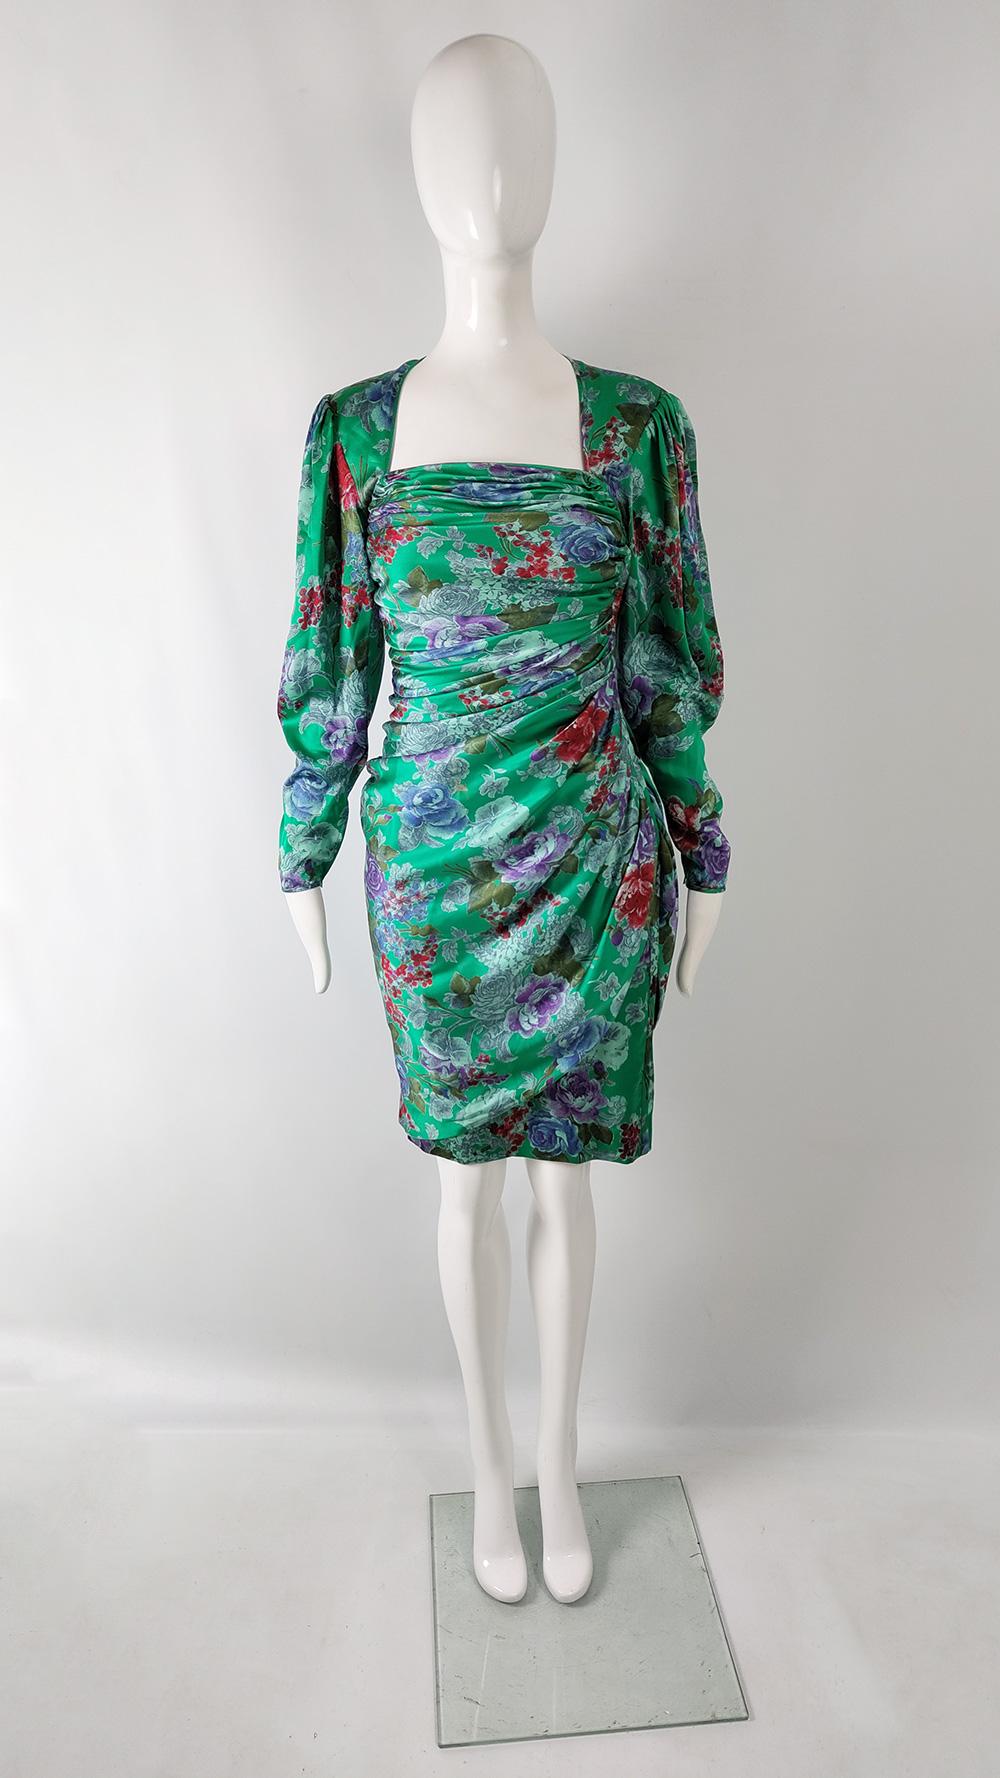 An ultra glamorous vintage womens evening dress from the 80s by luxury French fashion designer, Emanuel Ungaro. Made in Italy, from a green silk satin with one of Ungaro's bold Asian inspired floral prints throughout. Emanuel Ungaro is one of the